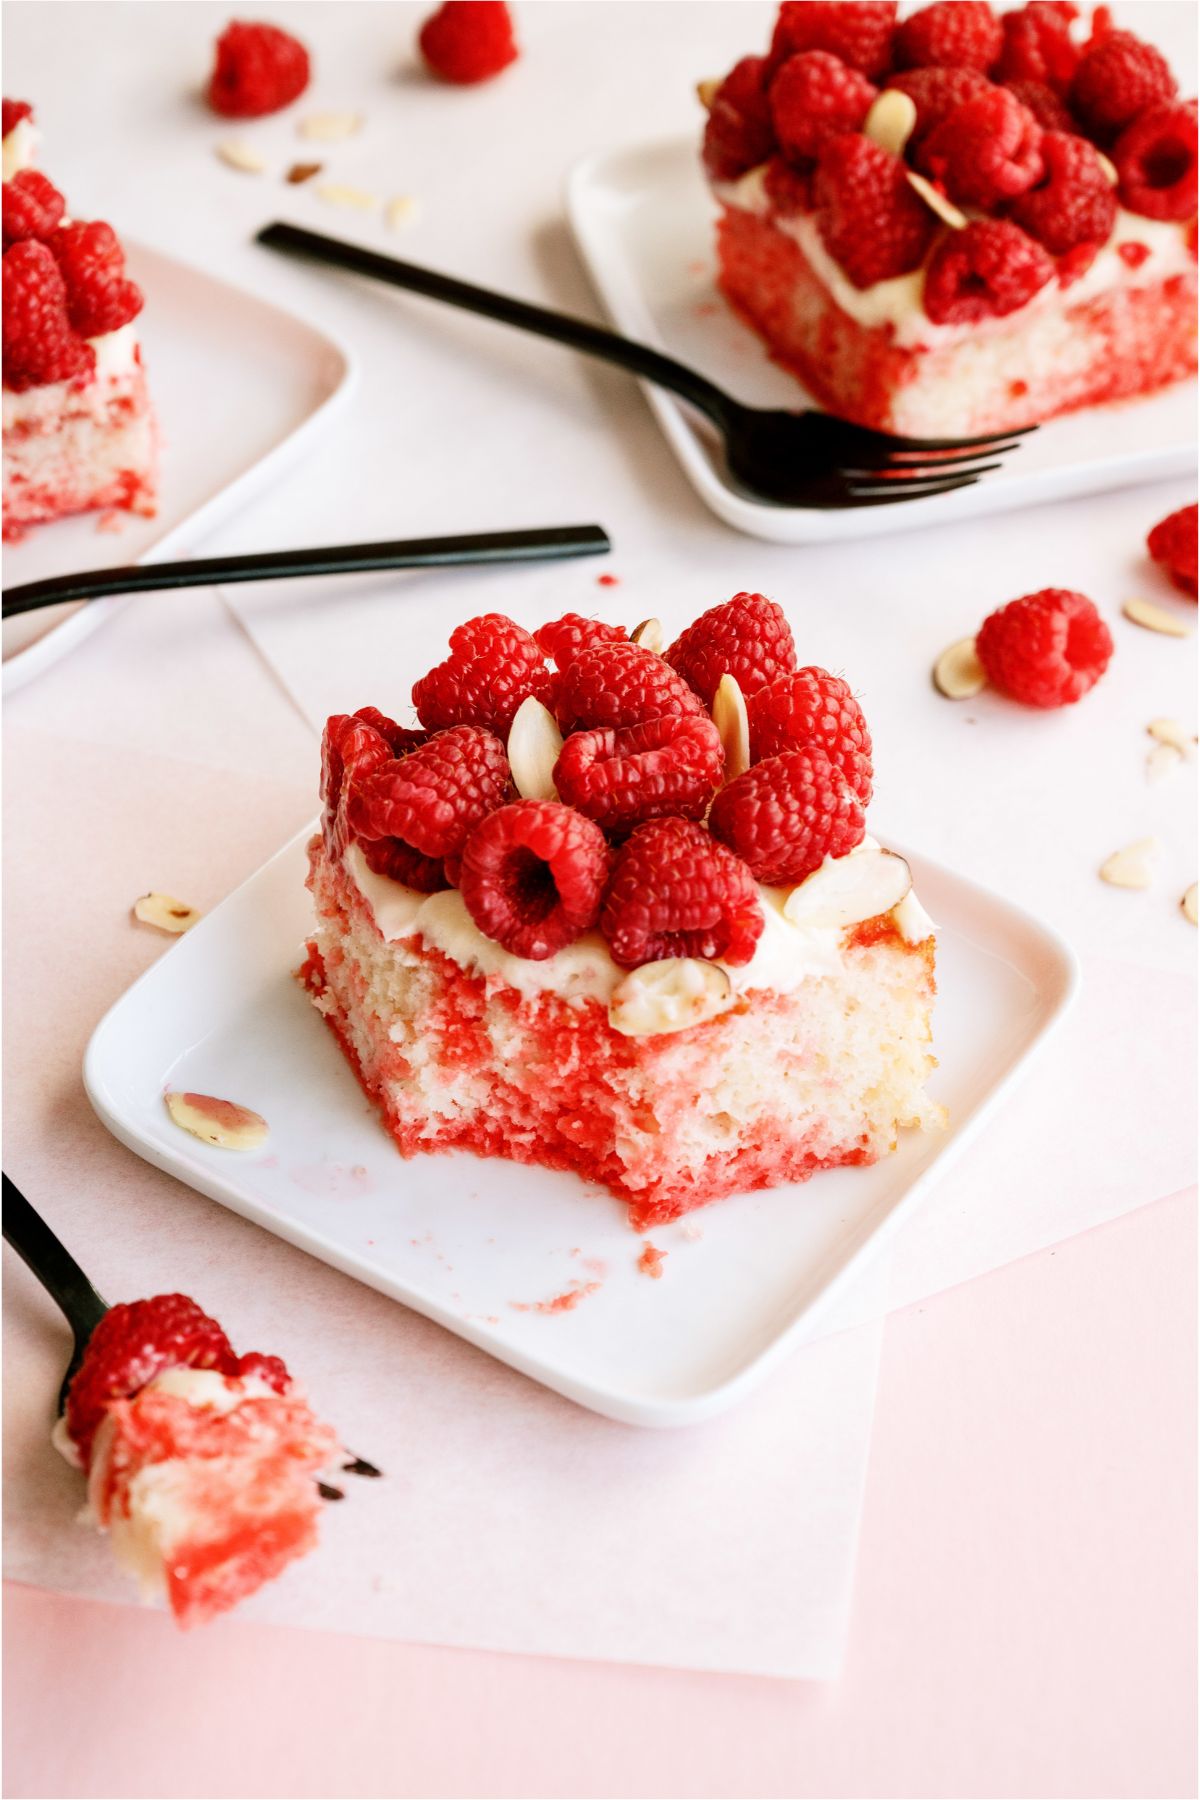 Slices of White Raspberry Poke Cake on plates with forks